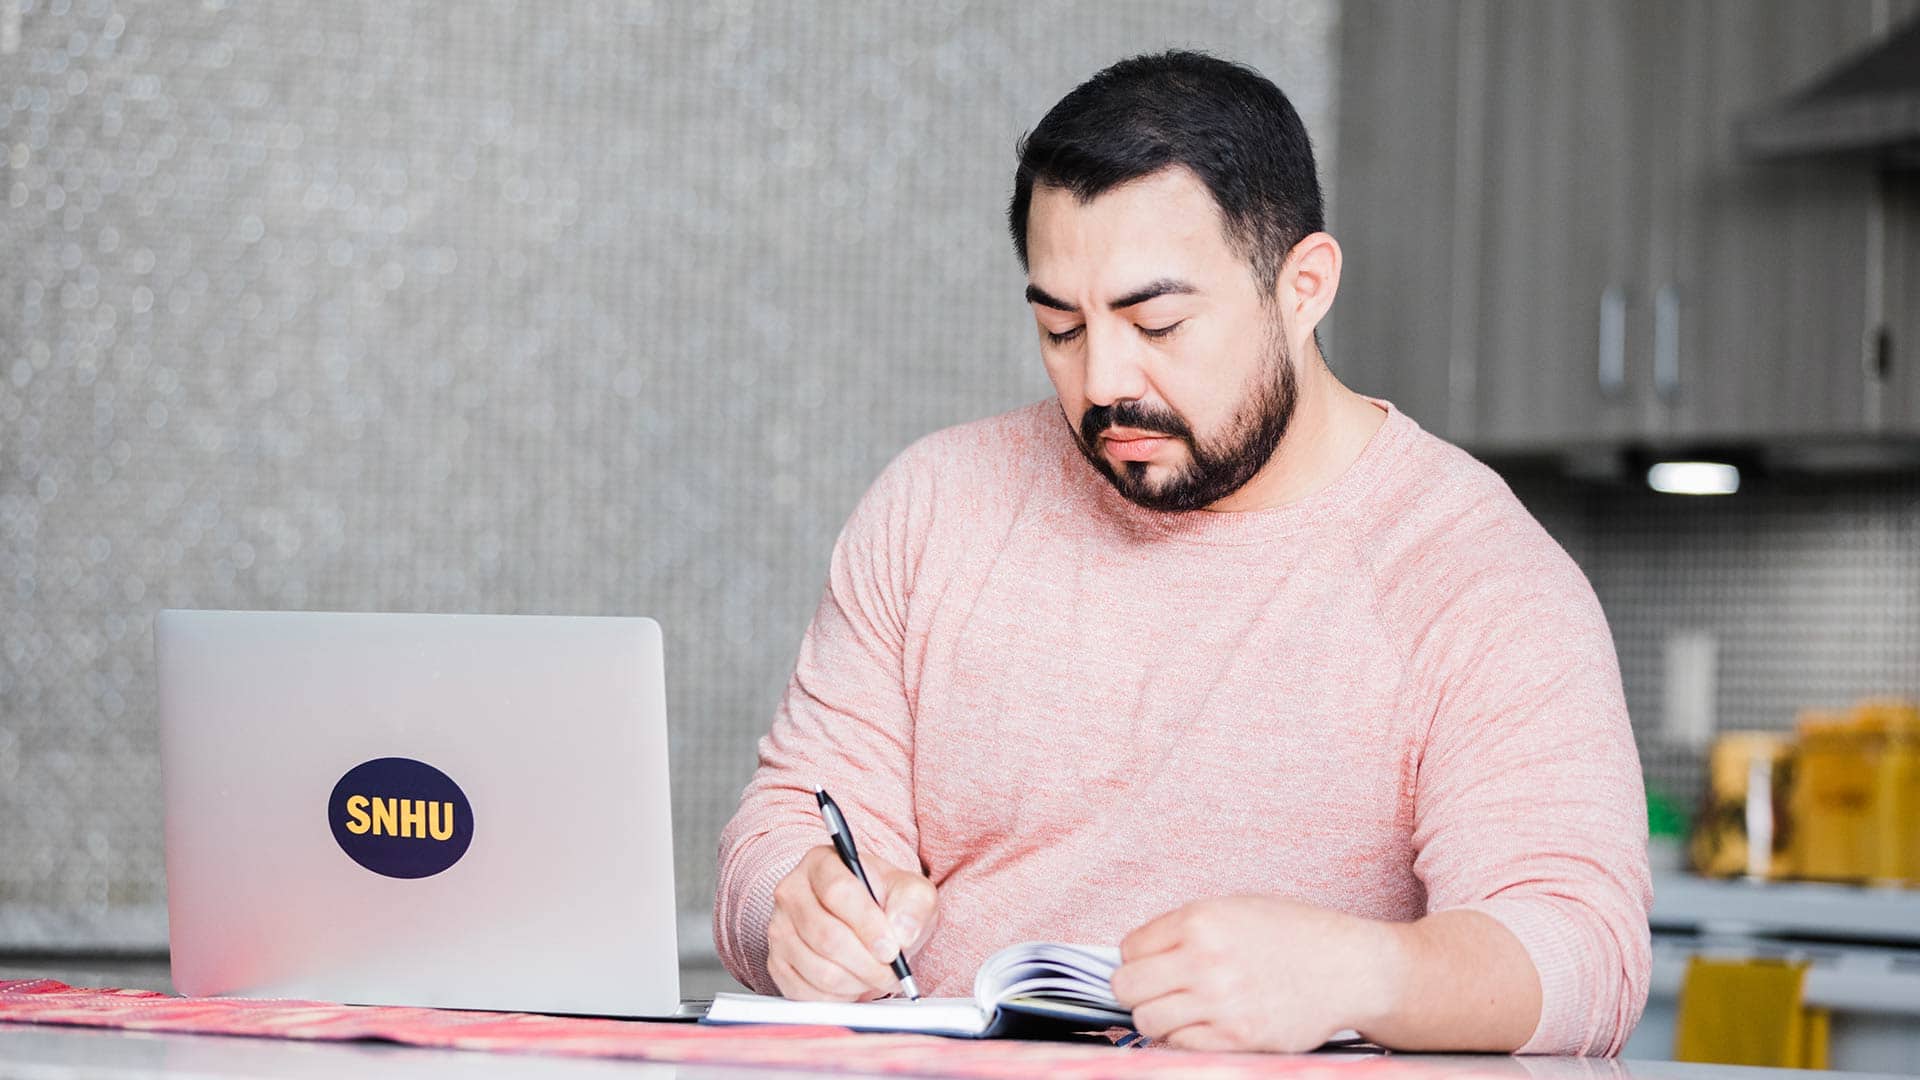 Jesus Suarez, who earned his degree from SNHU in 2021, in his kitchen writing in a small notebook with his open laptop with a SNHU sticker on the front next to him. 